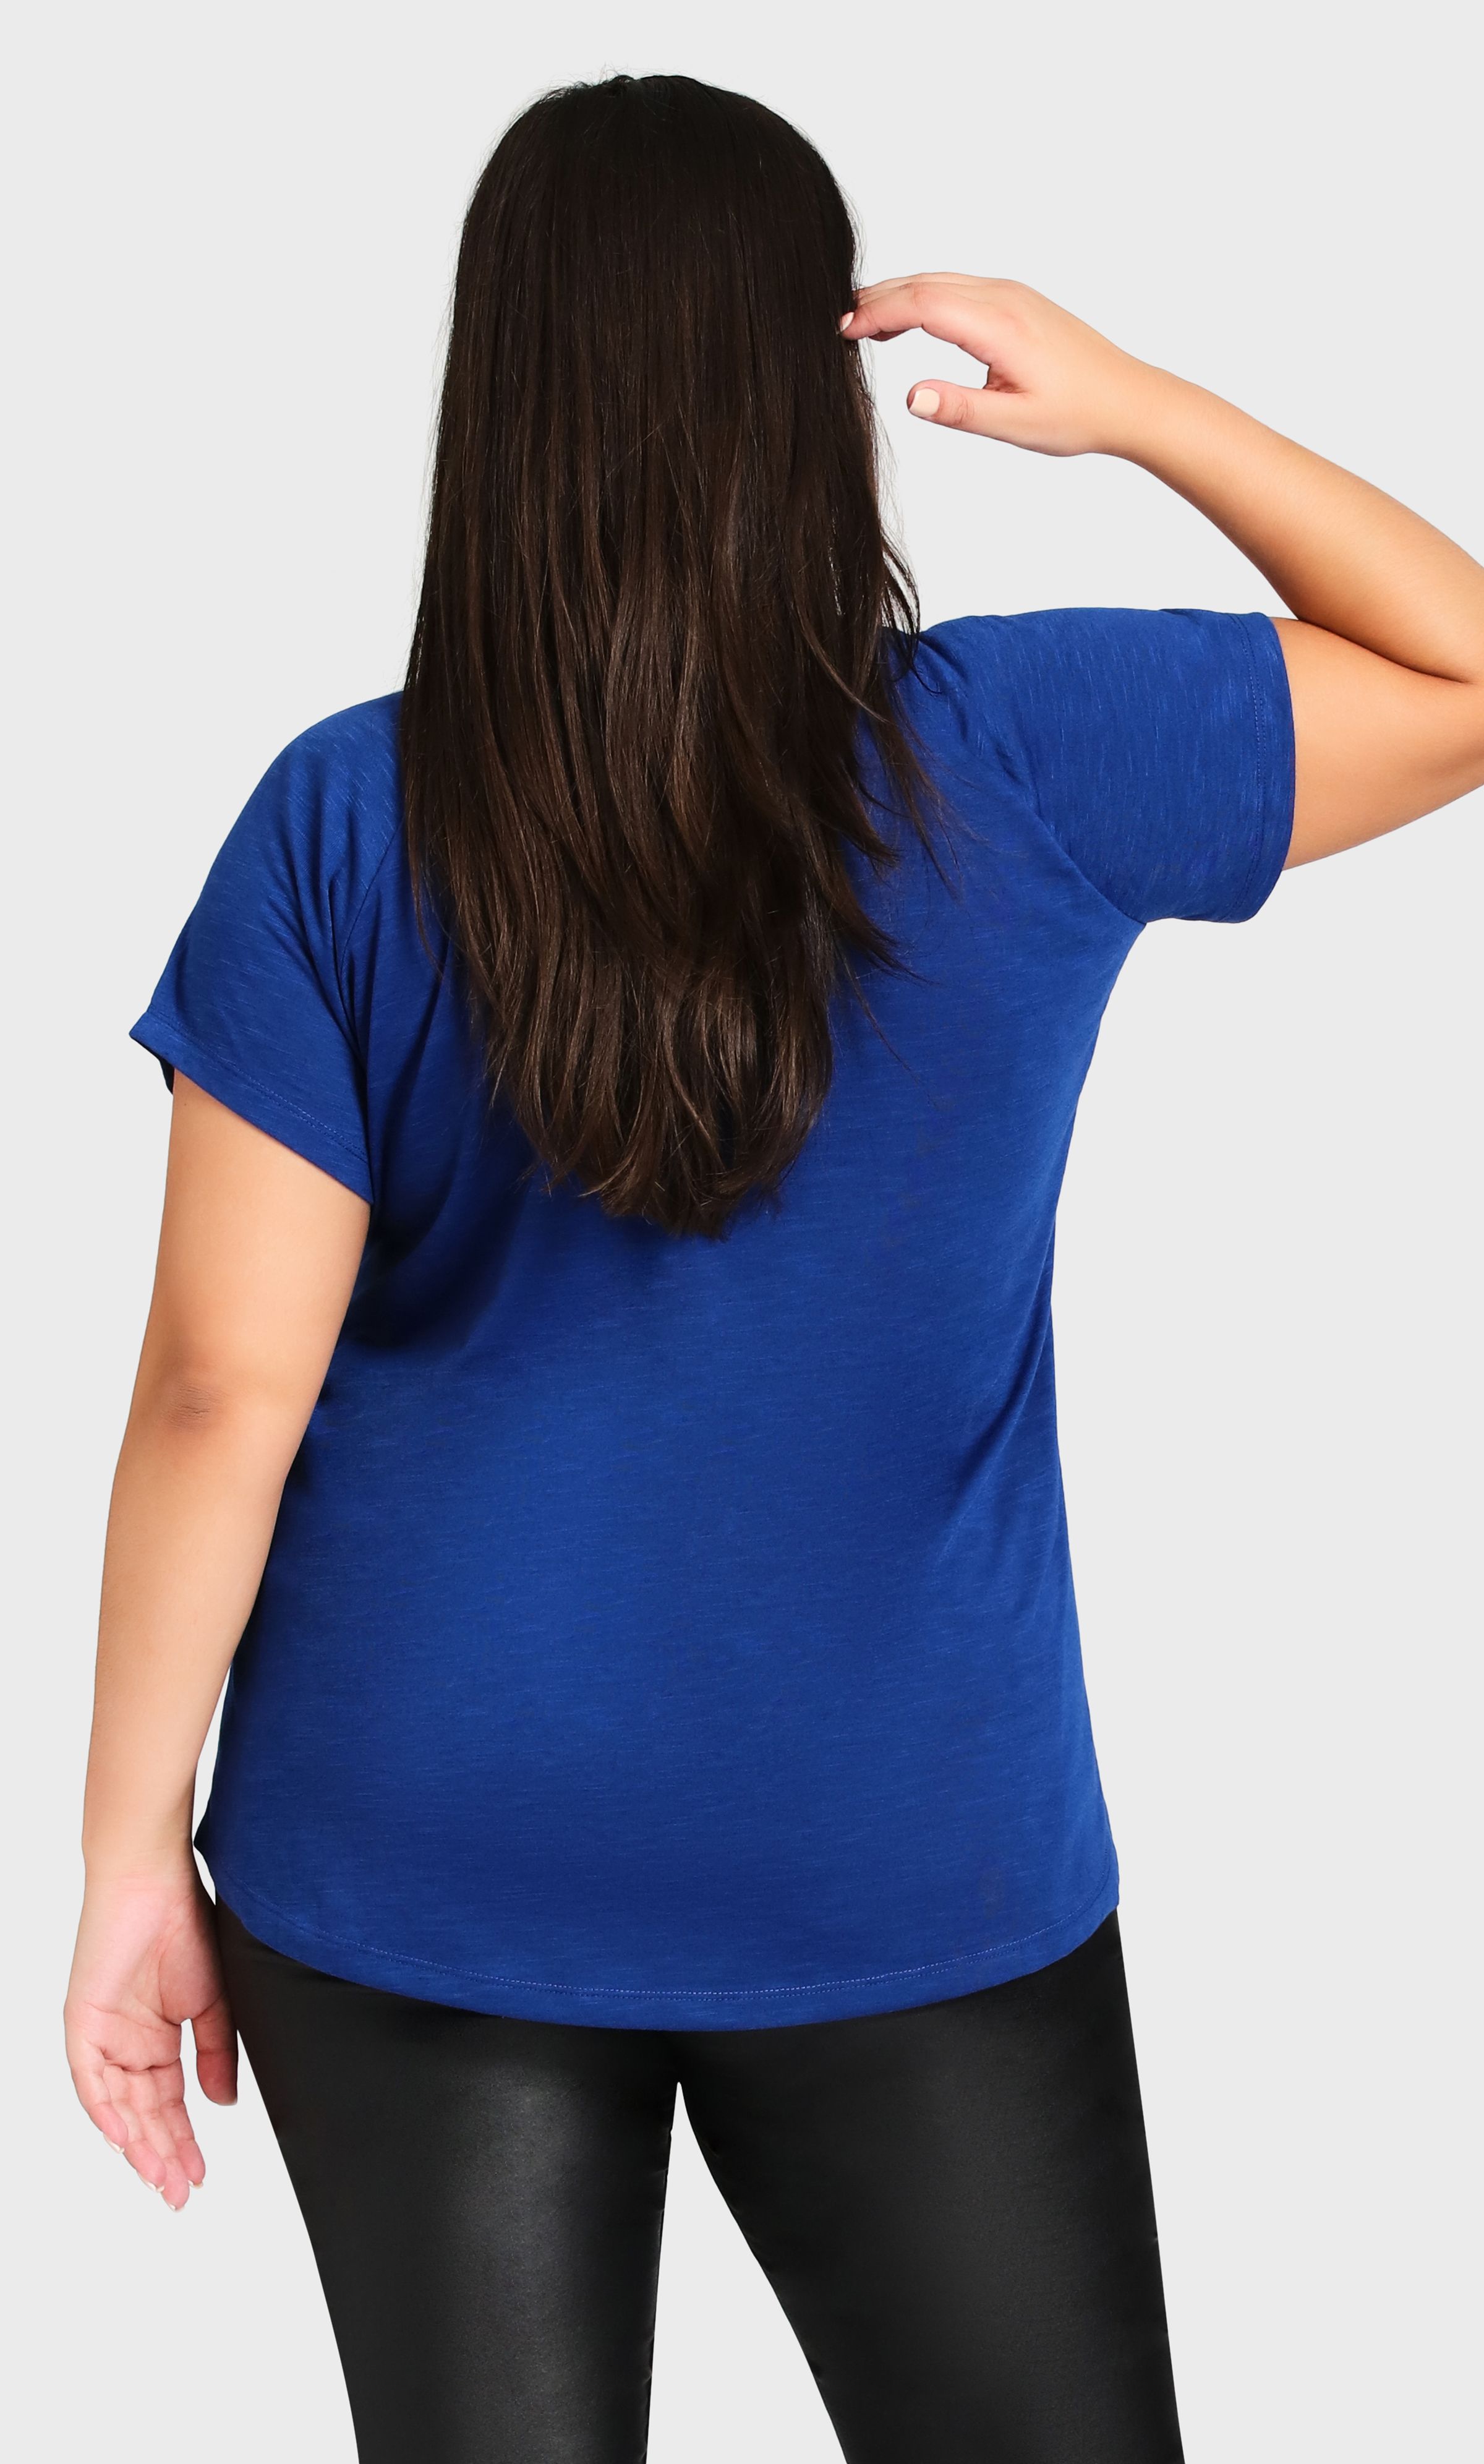 Colorful and charming, the cobalt 3 Bar V Neck Top is the perfect way to finish any outfit. A go-to short-sleeved top in a relaxed fit, this top is easy to wear & oh-so-comfortable. Key Features Include: - V-neckline with strap detailing - Short sleeves - Pull-over fit - Stretch fabrication - Relaxed silhouette - Straight hemline at hips Pair this top with some easy white capri pants and your favorite sneakers.